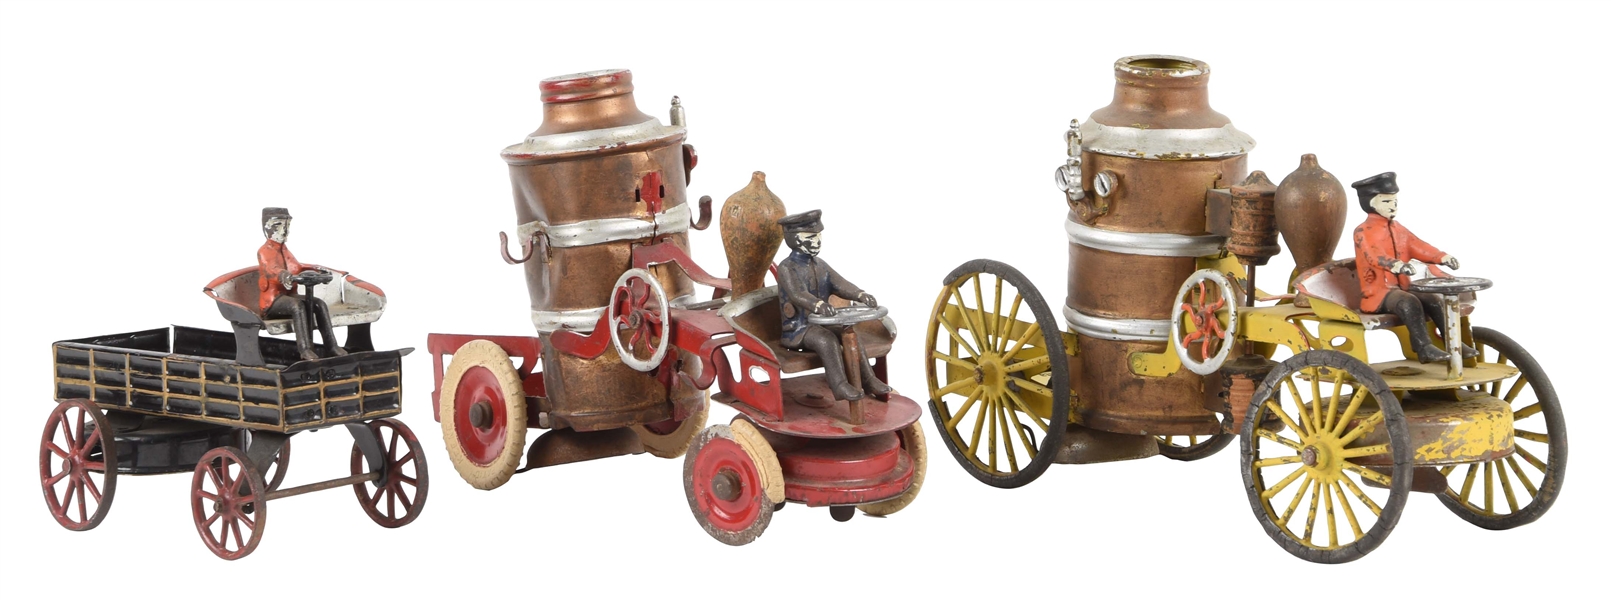 LOT OF 3: EARLY AMERICAN TIN WIND-UP TRANSPORTATION TOYS. 